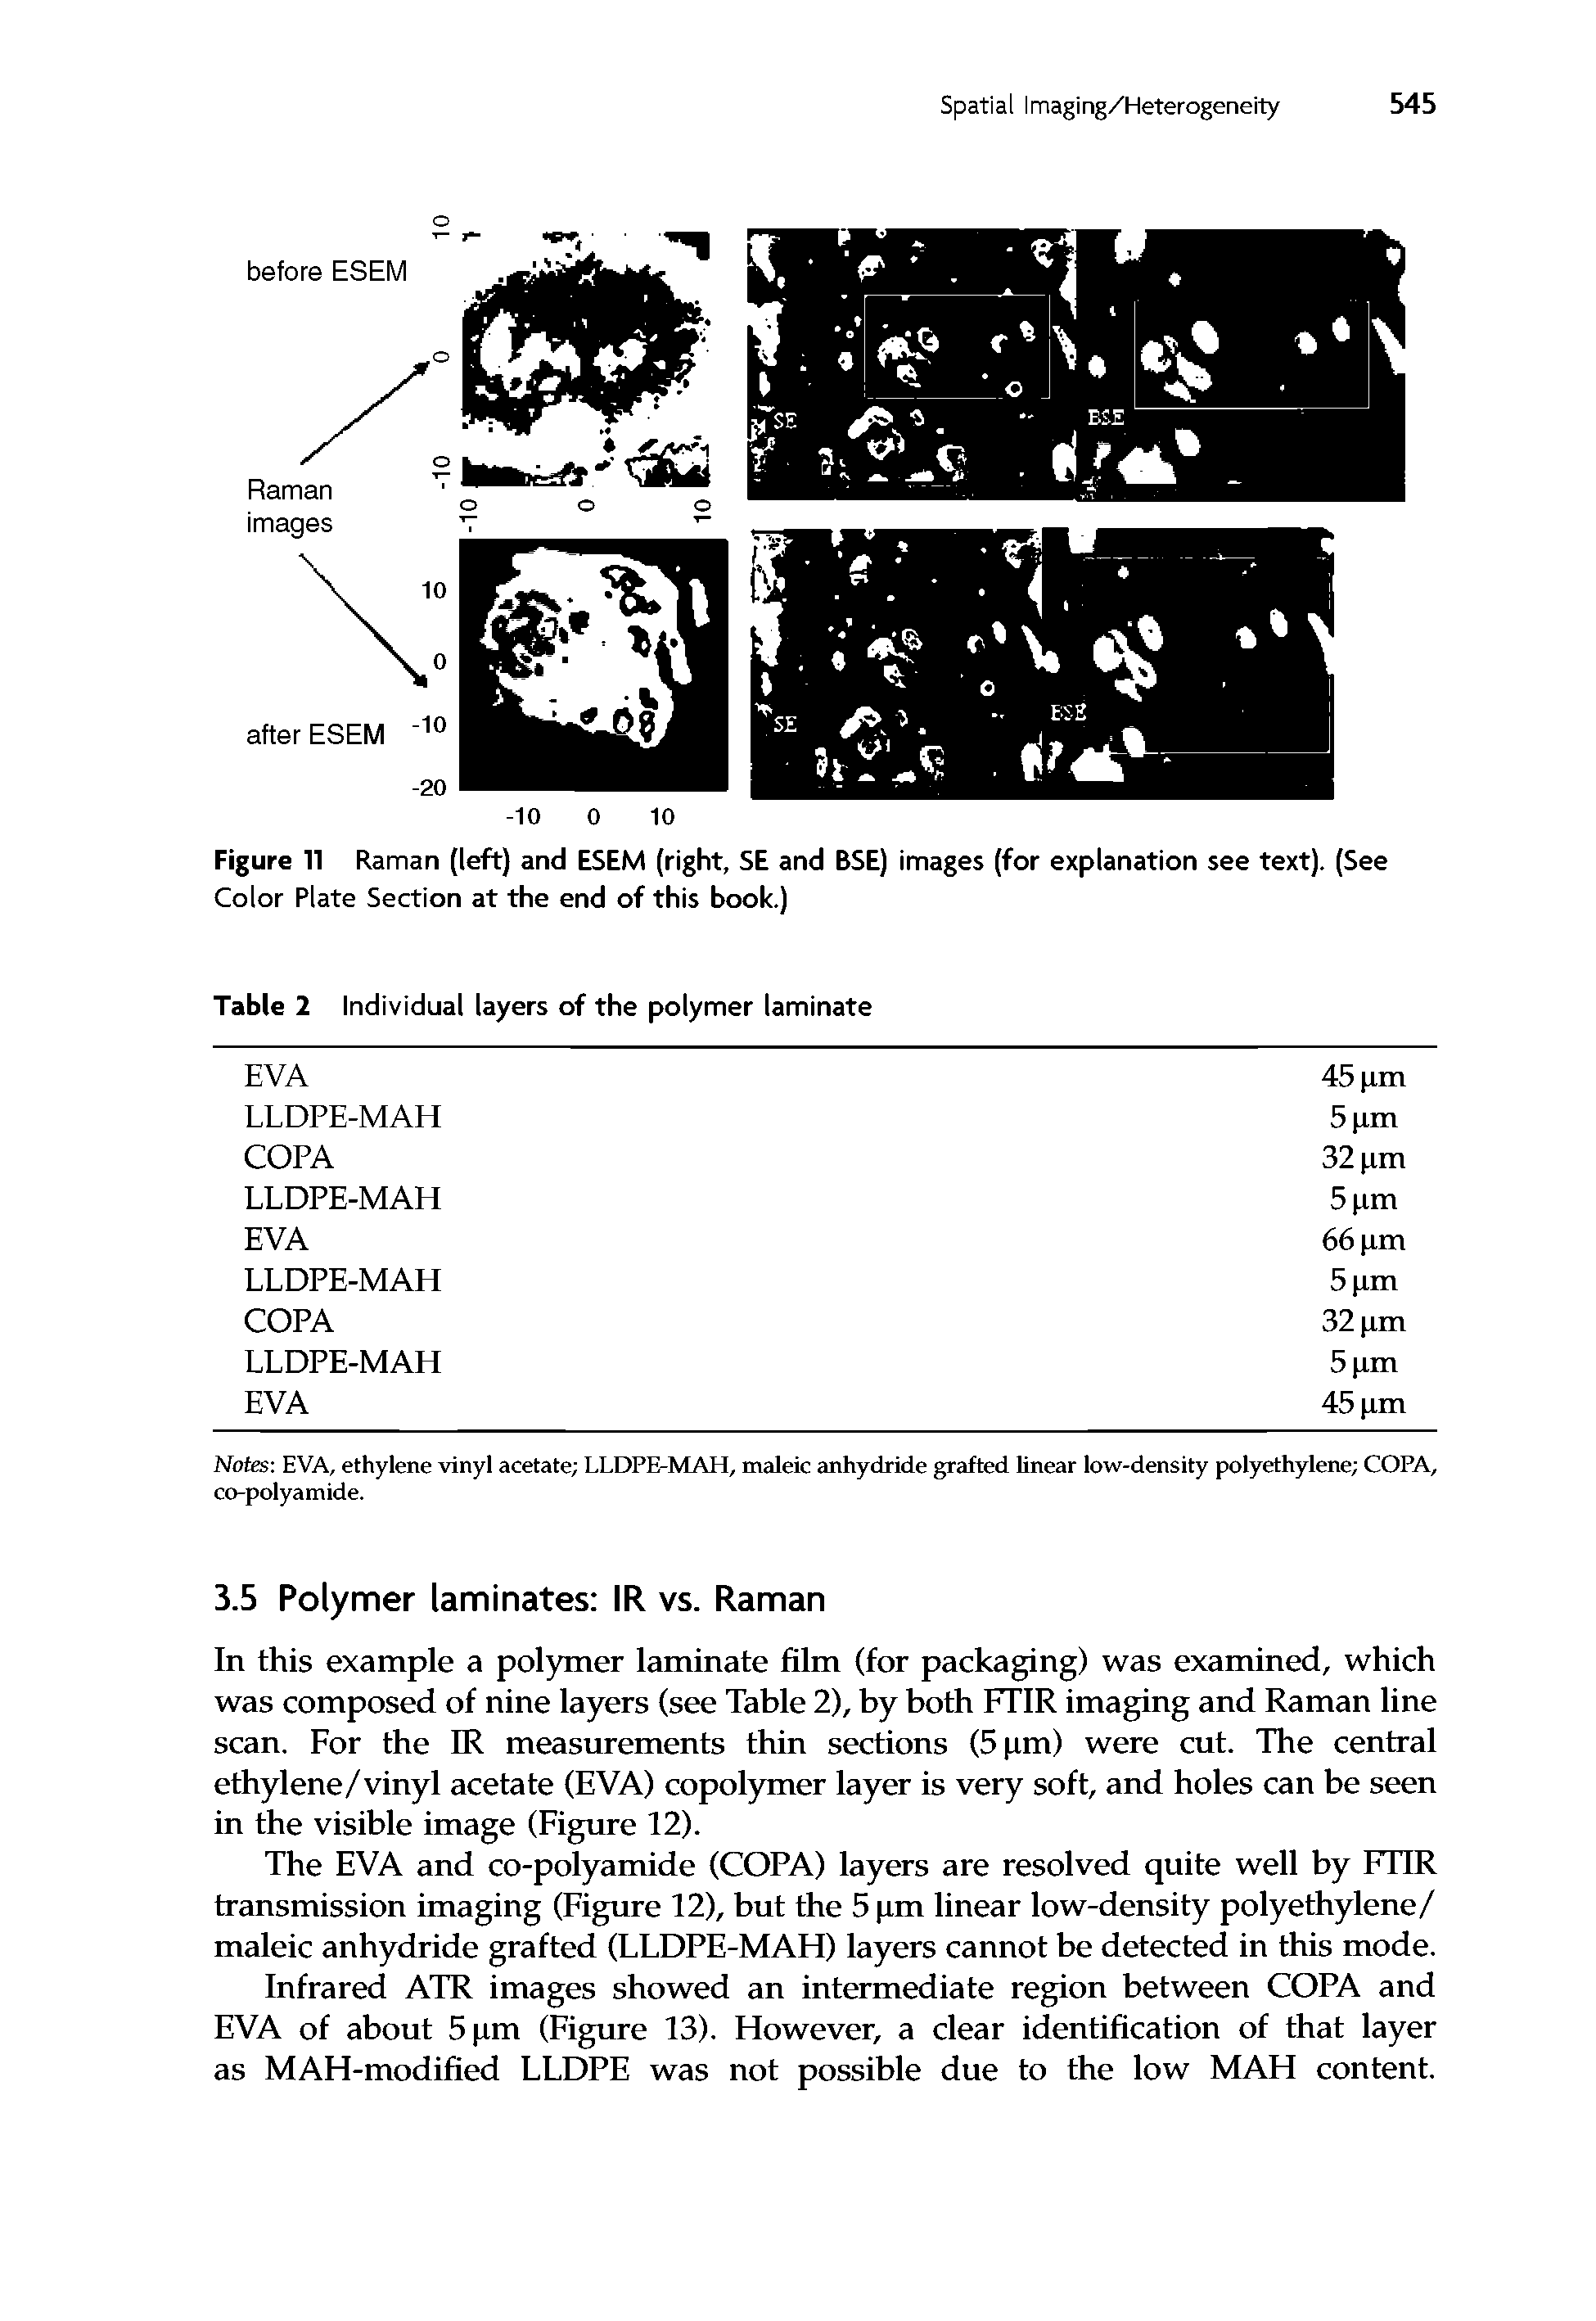 Figure 11 Raman (left) and ESEM (right, SE and BSE) images (for explanation see text). (See Color Plate Section at the end of this book.)...